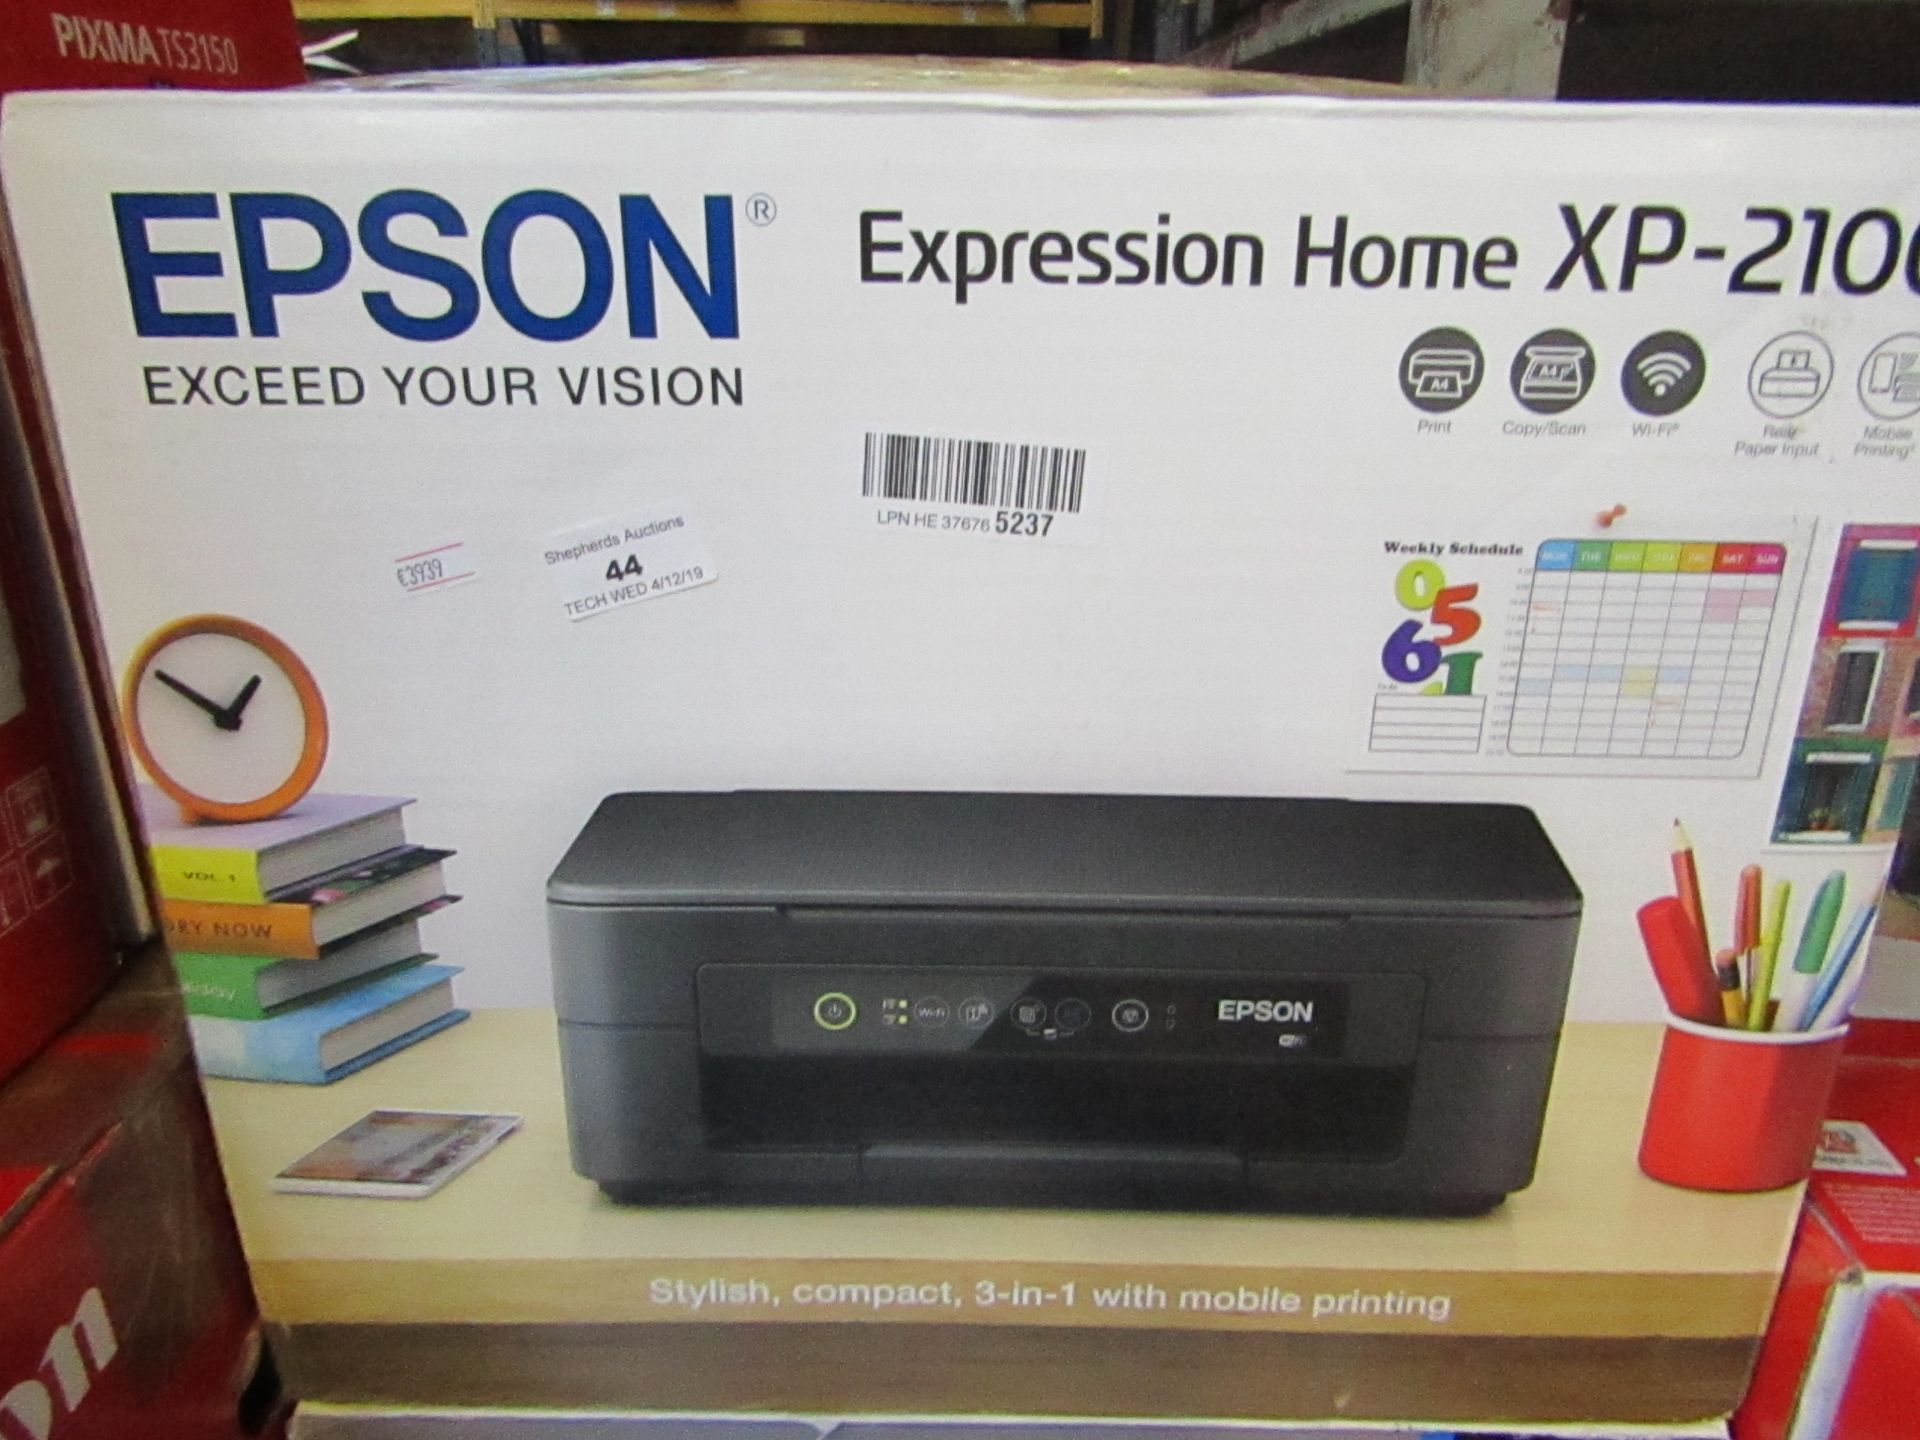 Epson Expression XP-2100 wireless printer, boxed and unchecked.